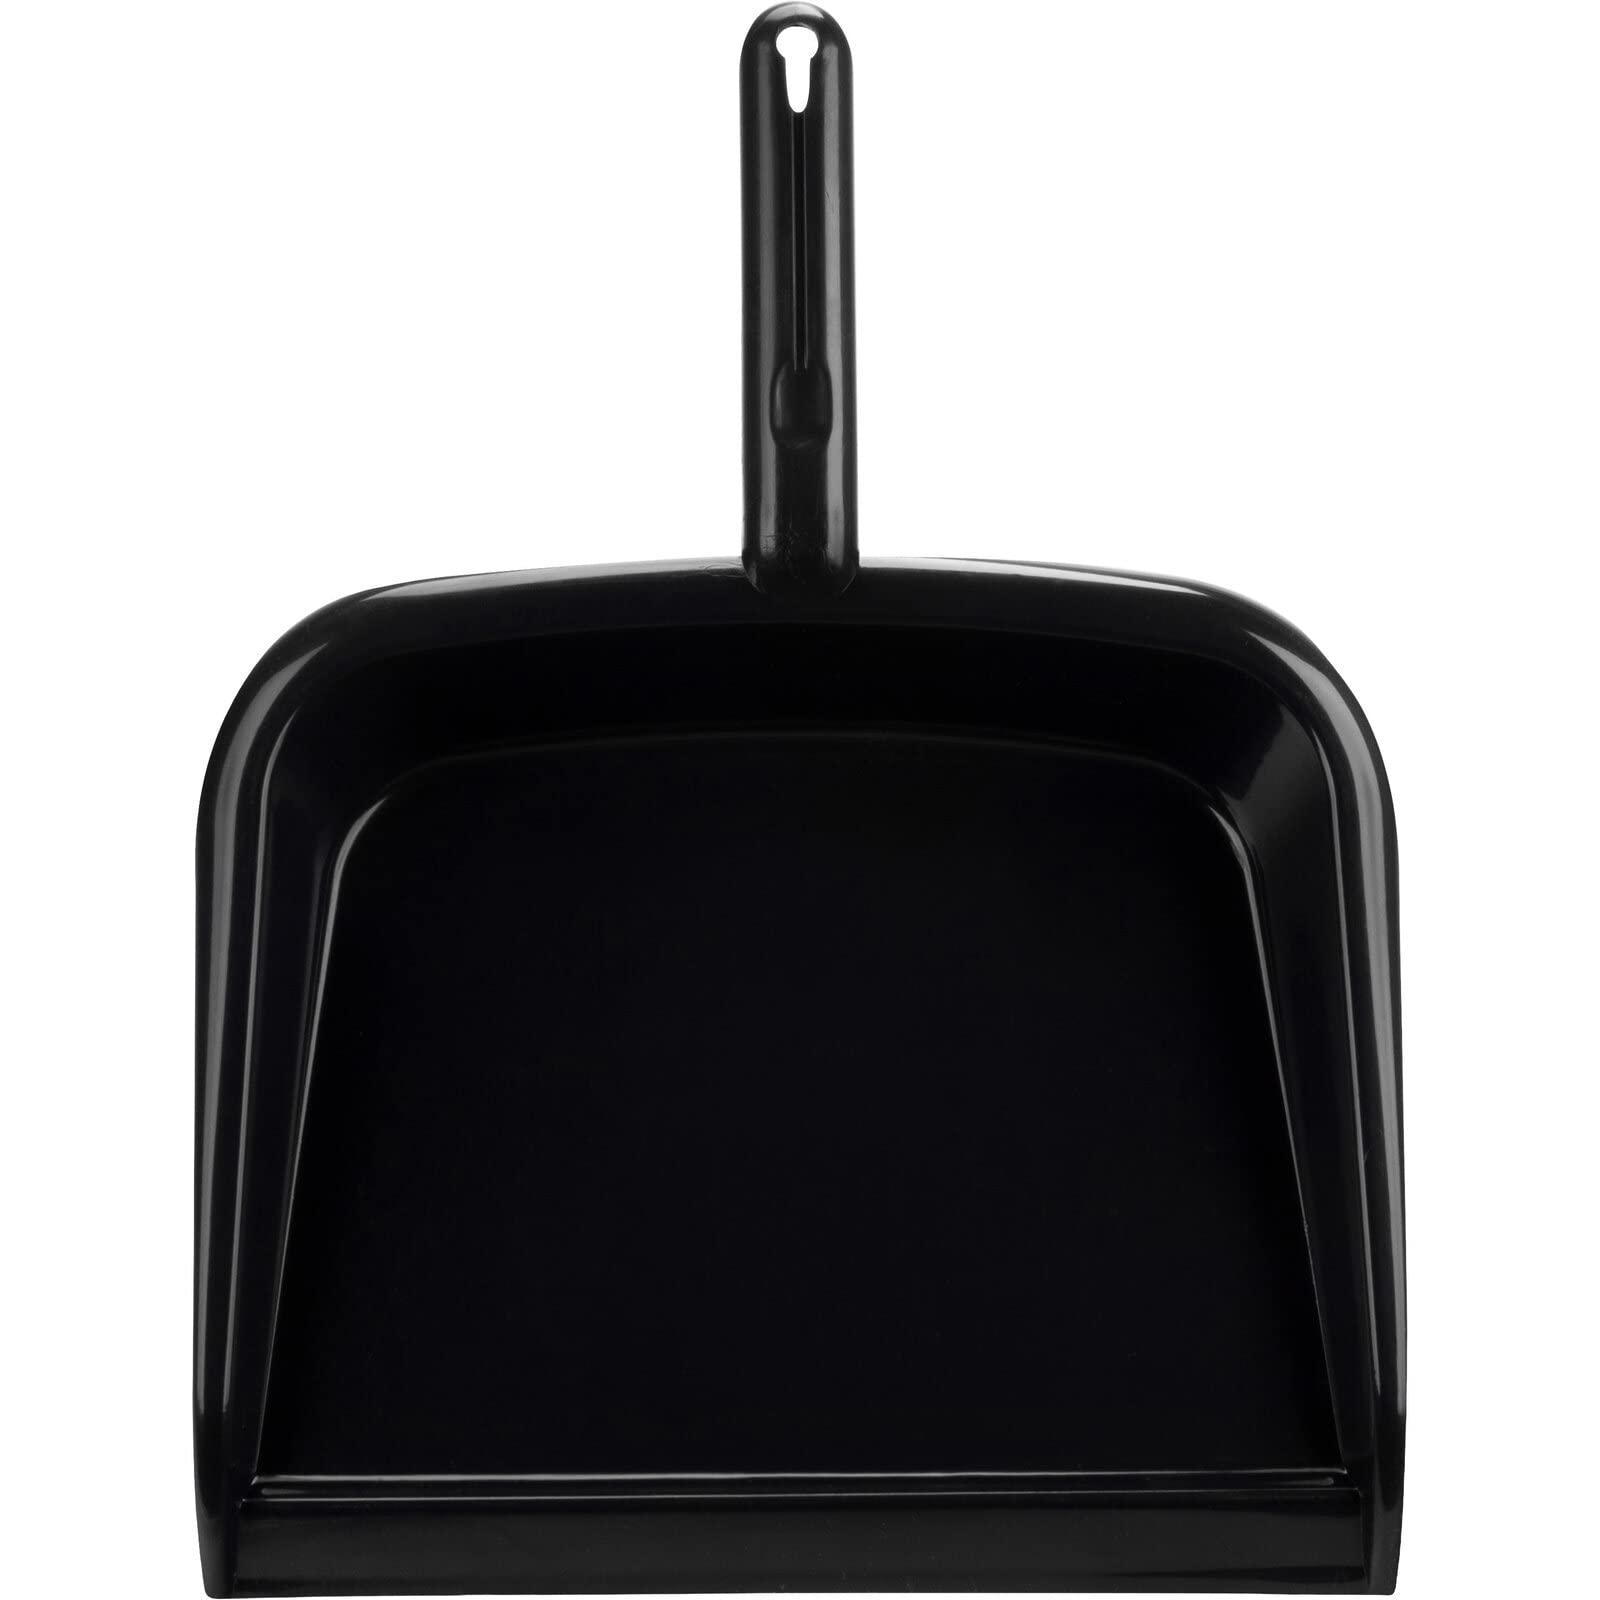 SPARTA Large Handheld Dustpan with Hanging Hole, Heavy-Duty Plastic Dustpan with Wide Lip for Countertops and Surfaces, Plastic, 10 Inches, Black